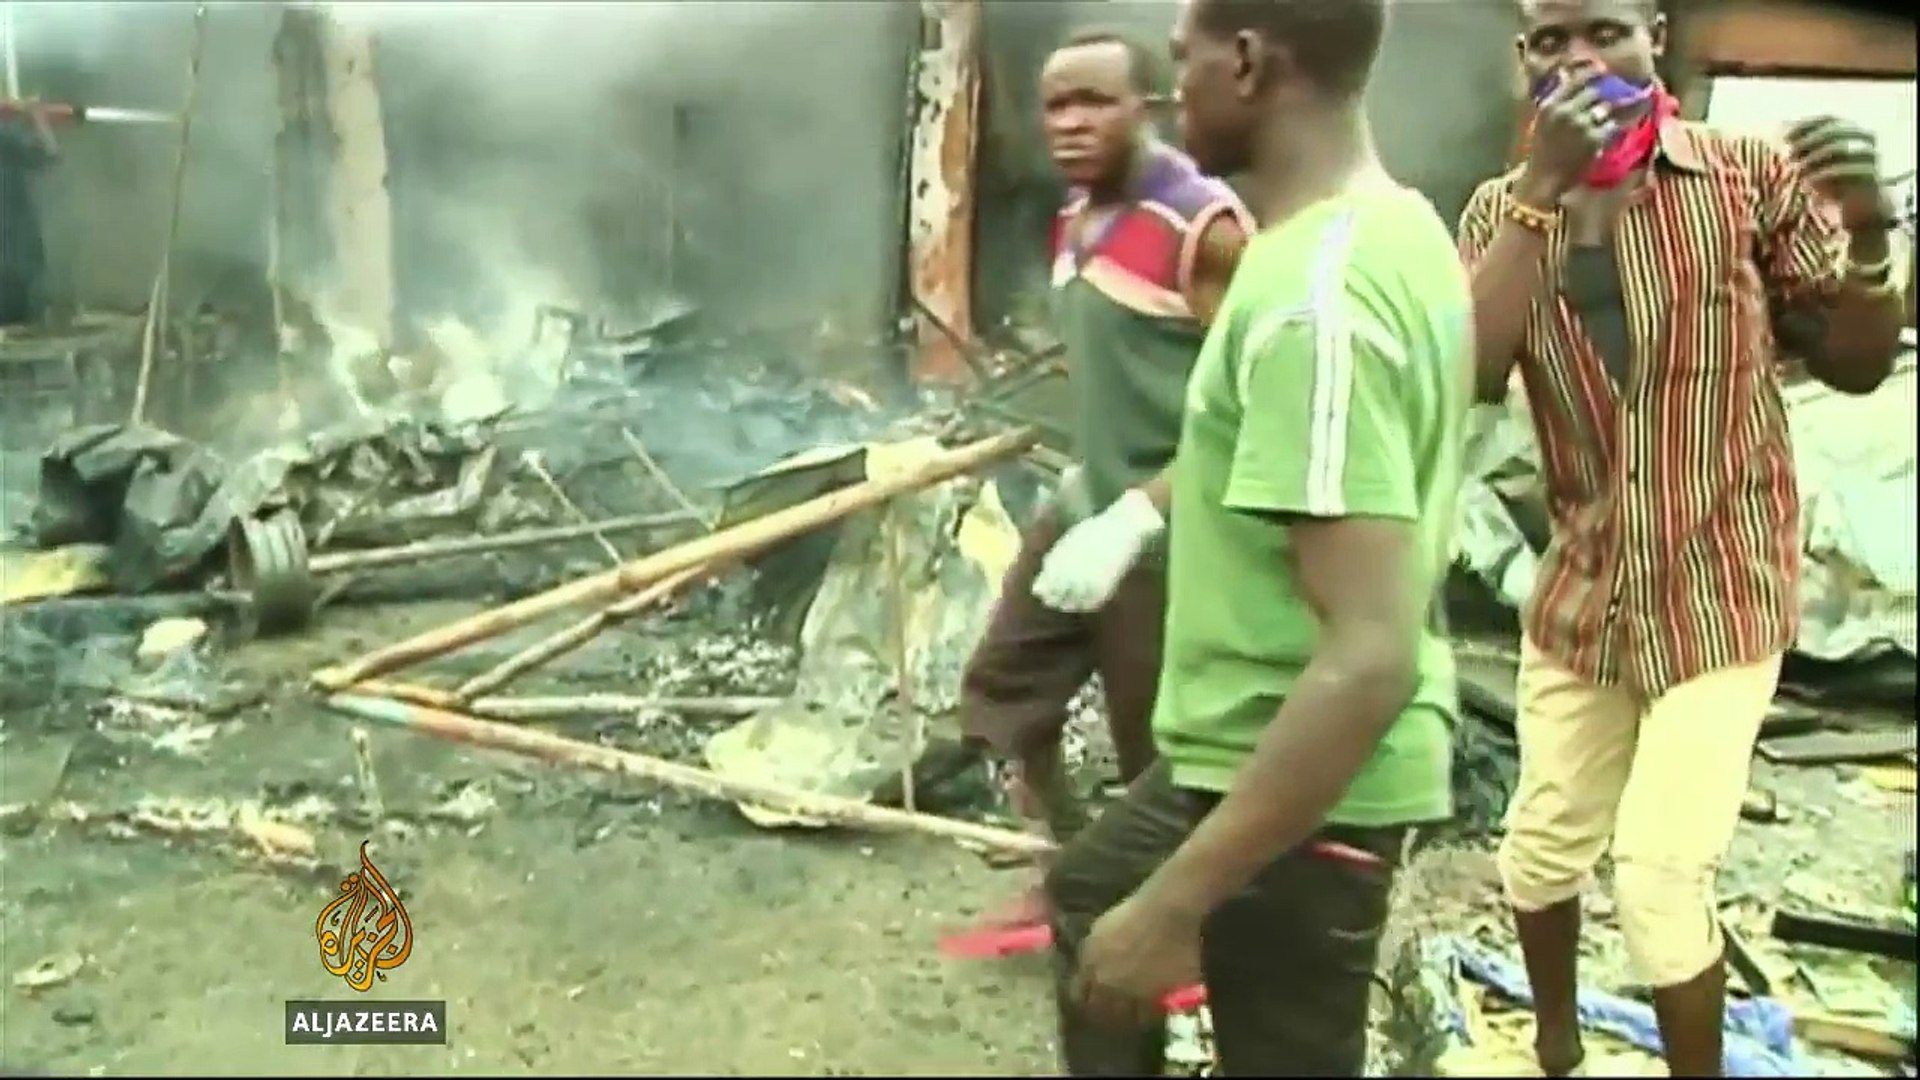 More than 100 people killed in Nigerian blasts